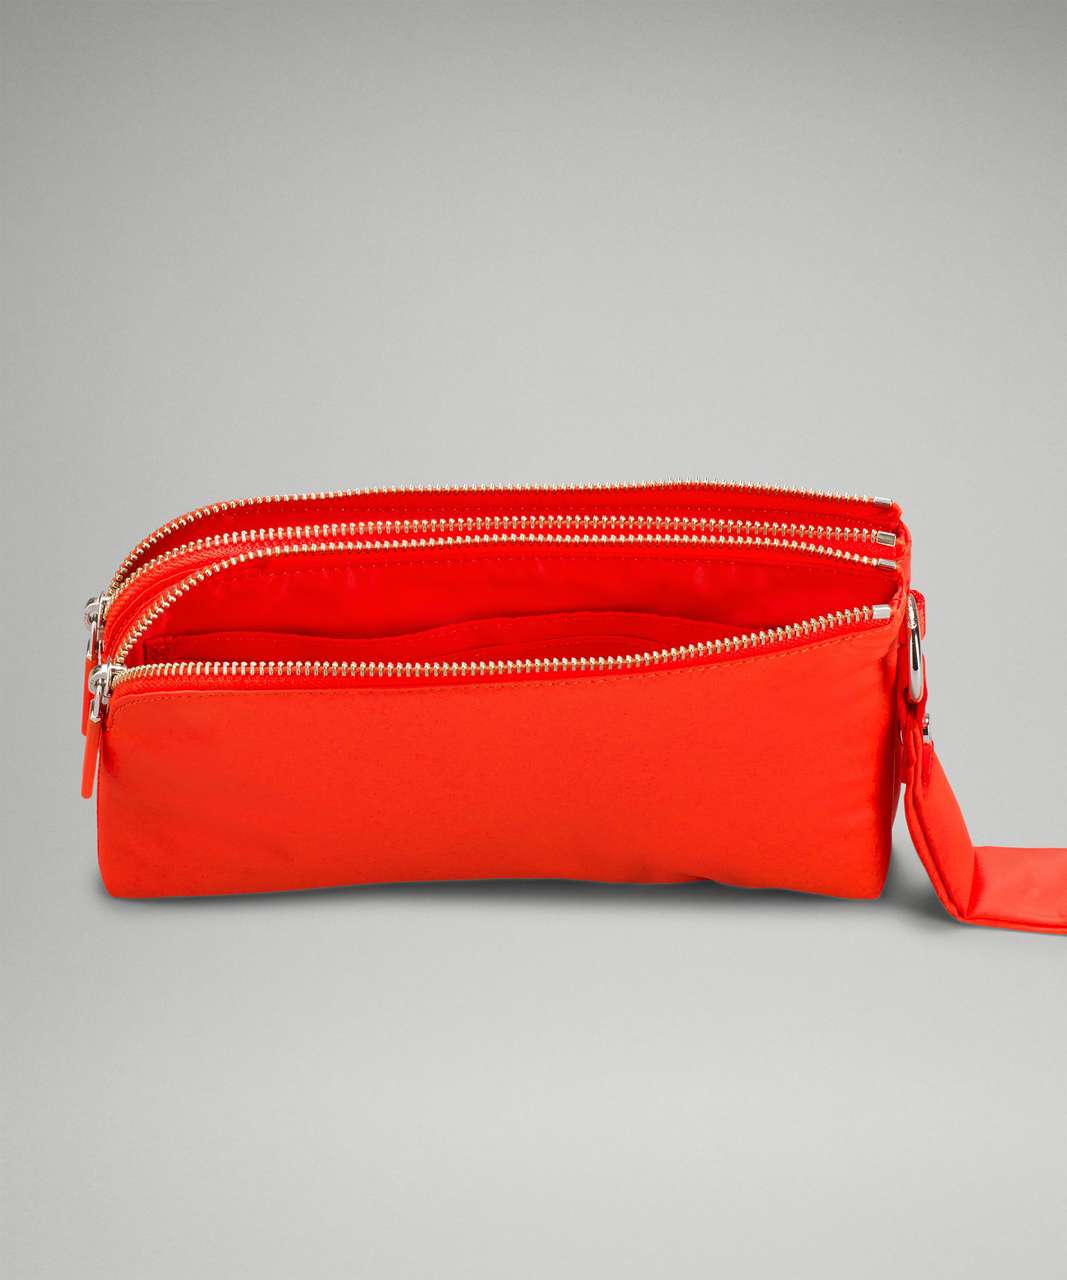 Lululemon Now and Always Pouch *Puffy - Autumn Red